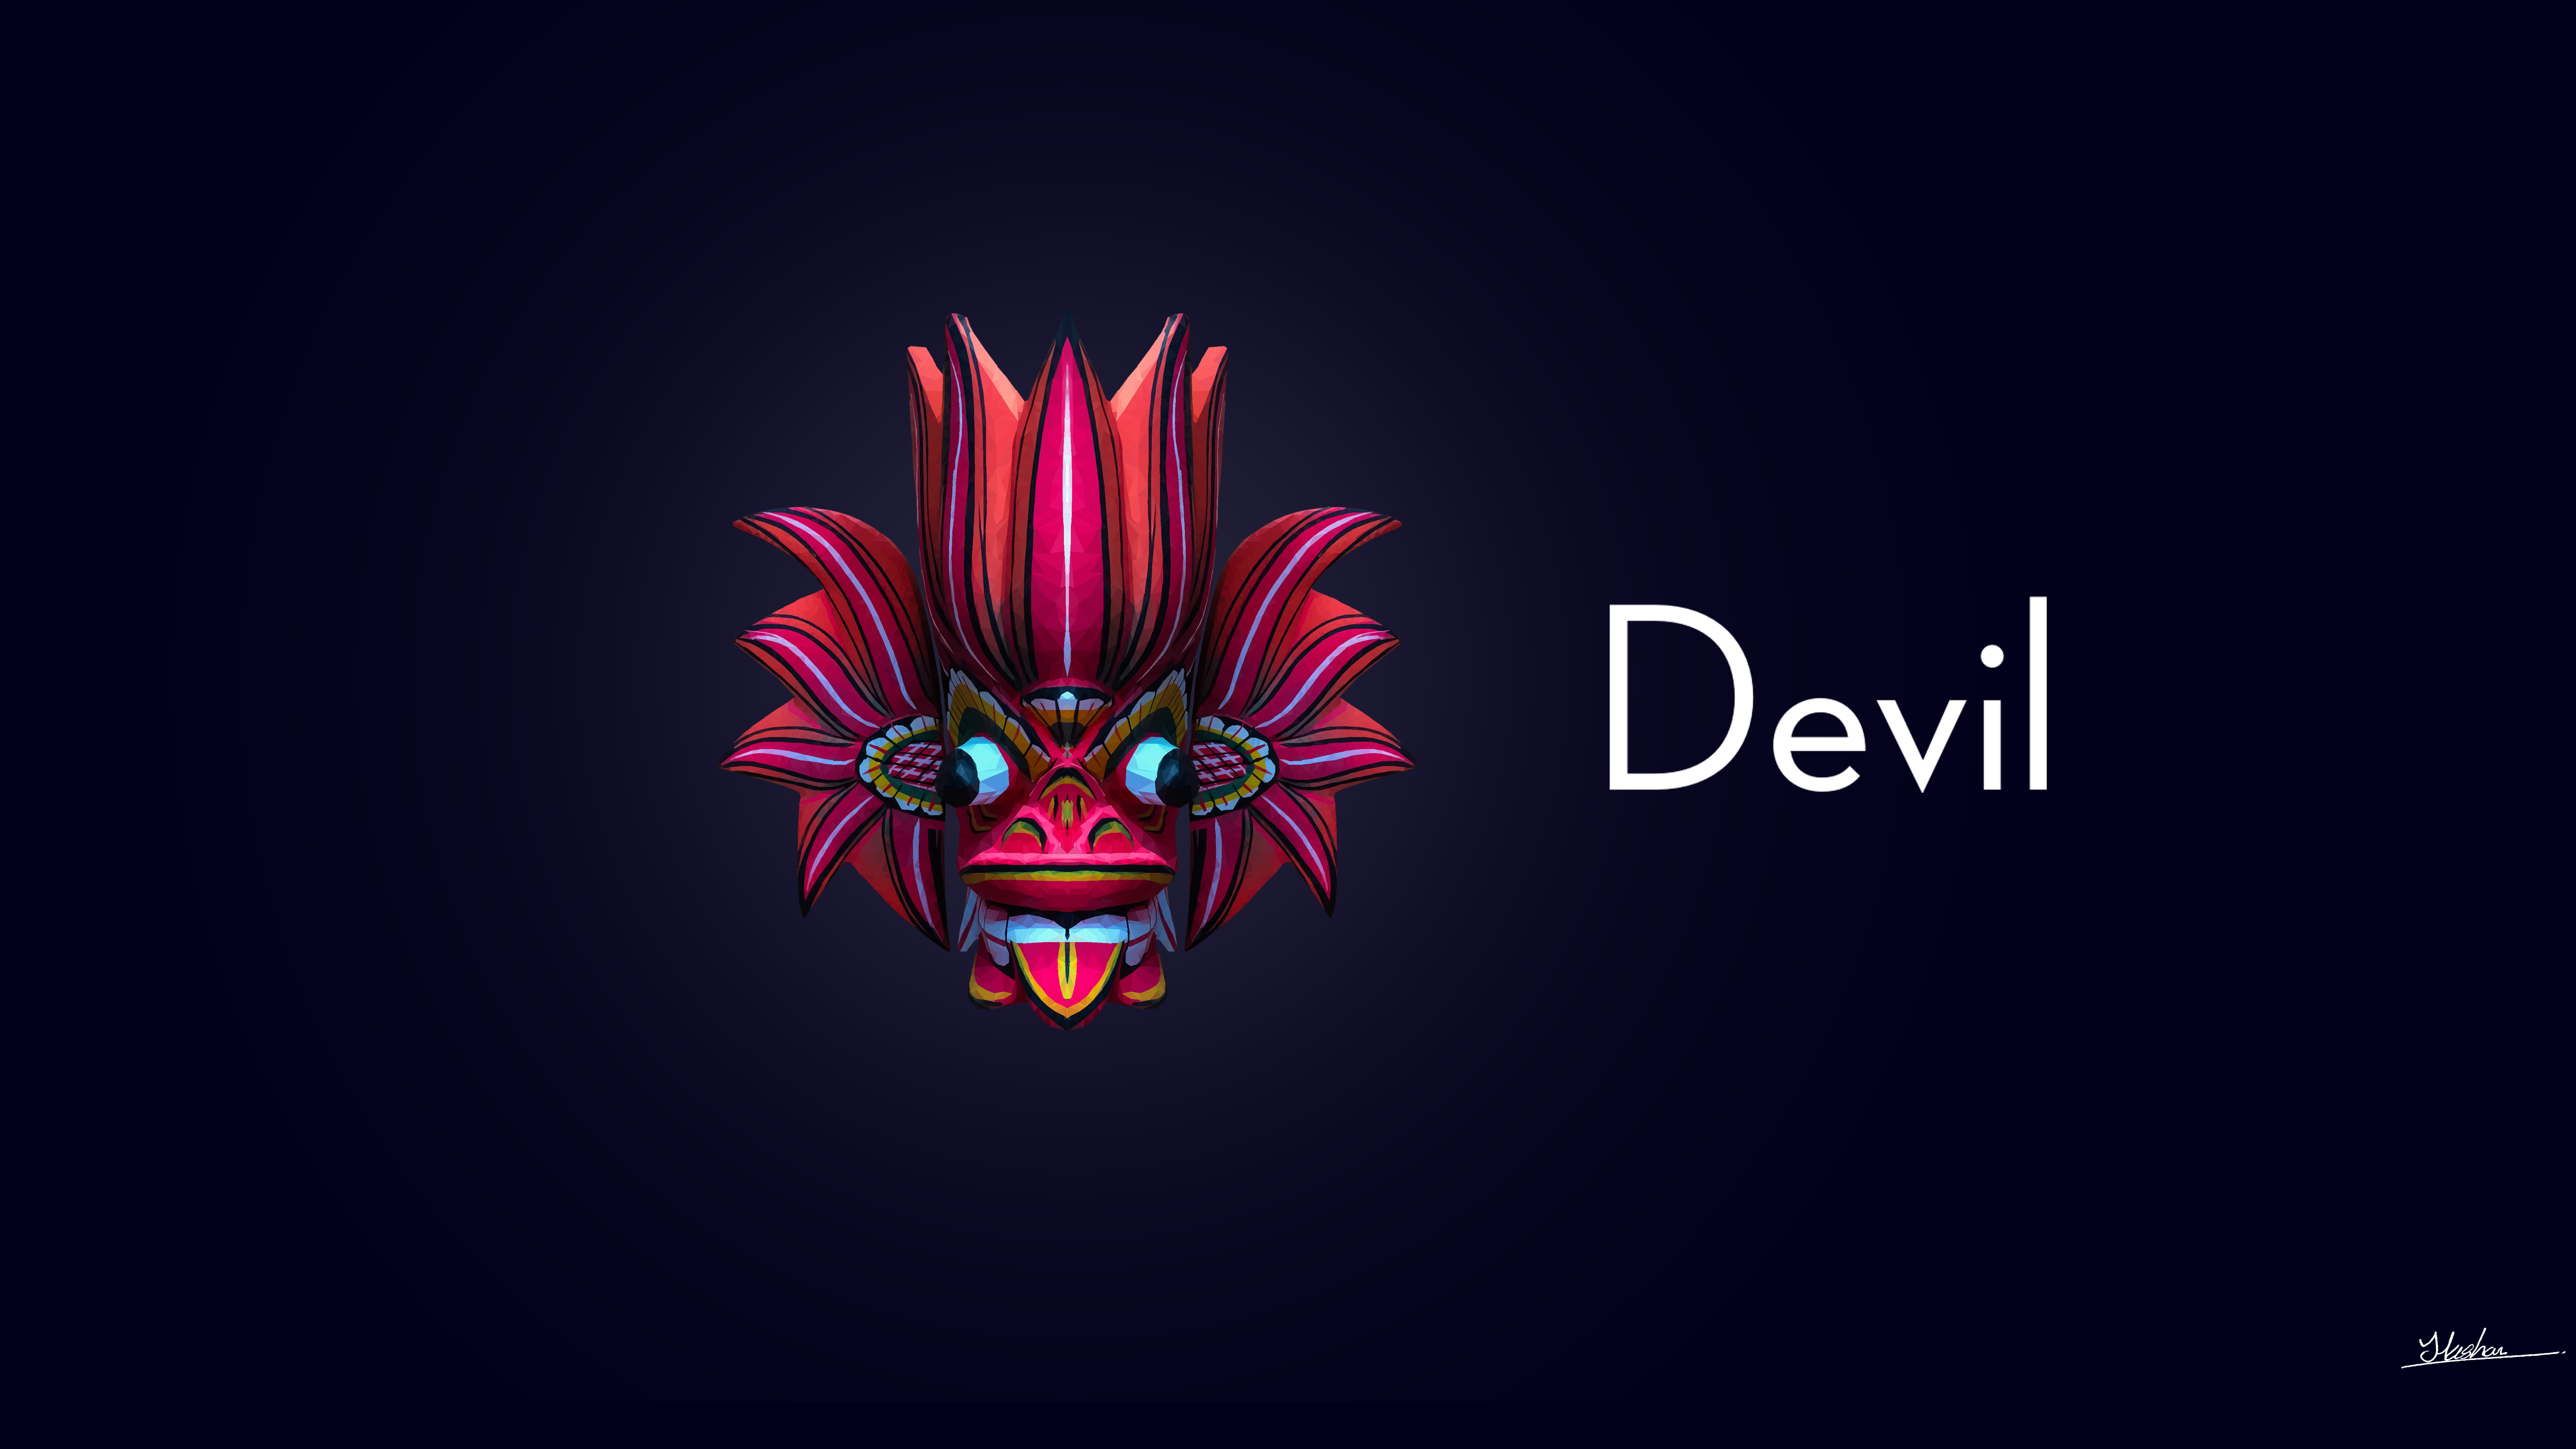 An Image Of A Demon Hd Wallpaper And Background, Cool Demon Pictures  Background Image And Wallpaper for Free Download